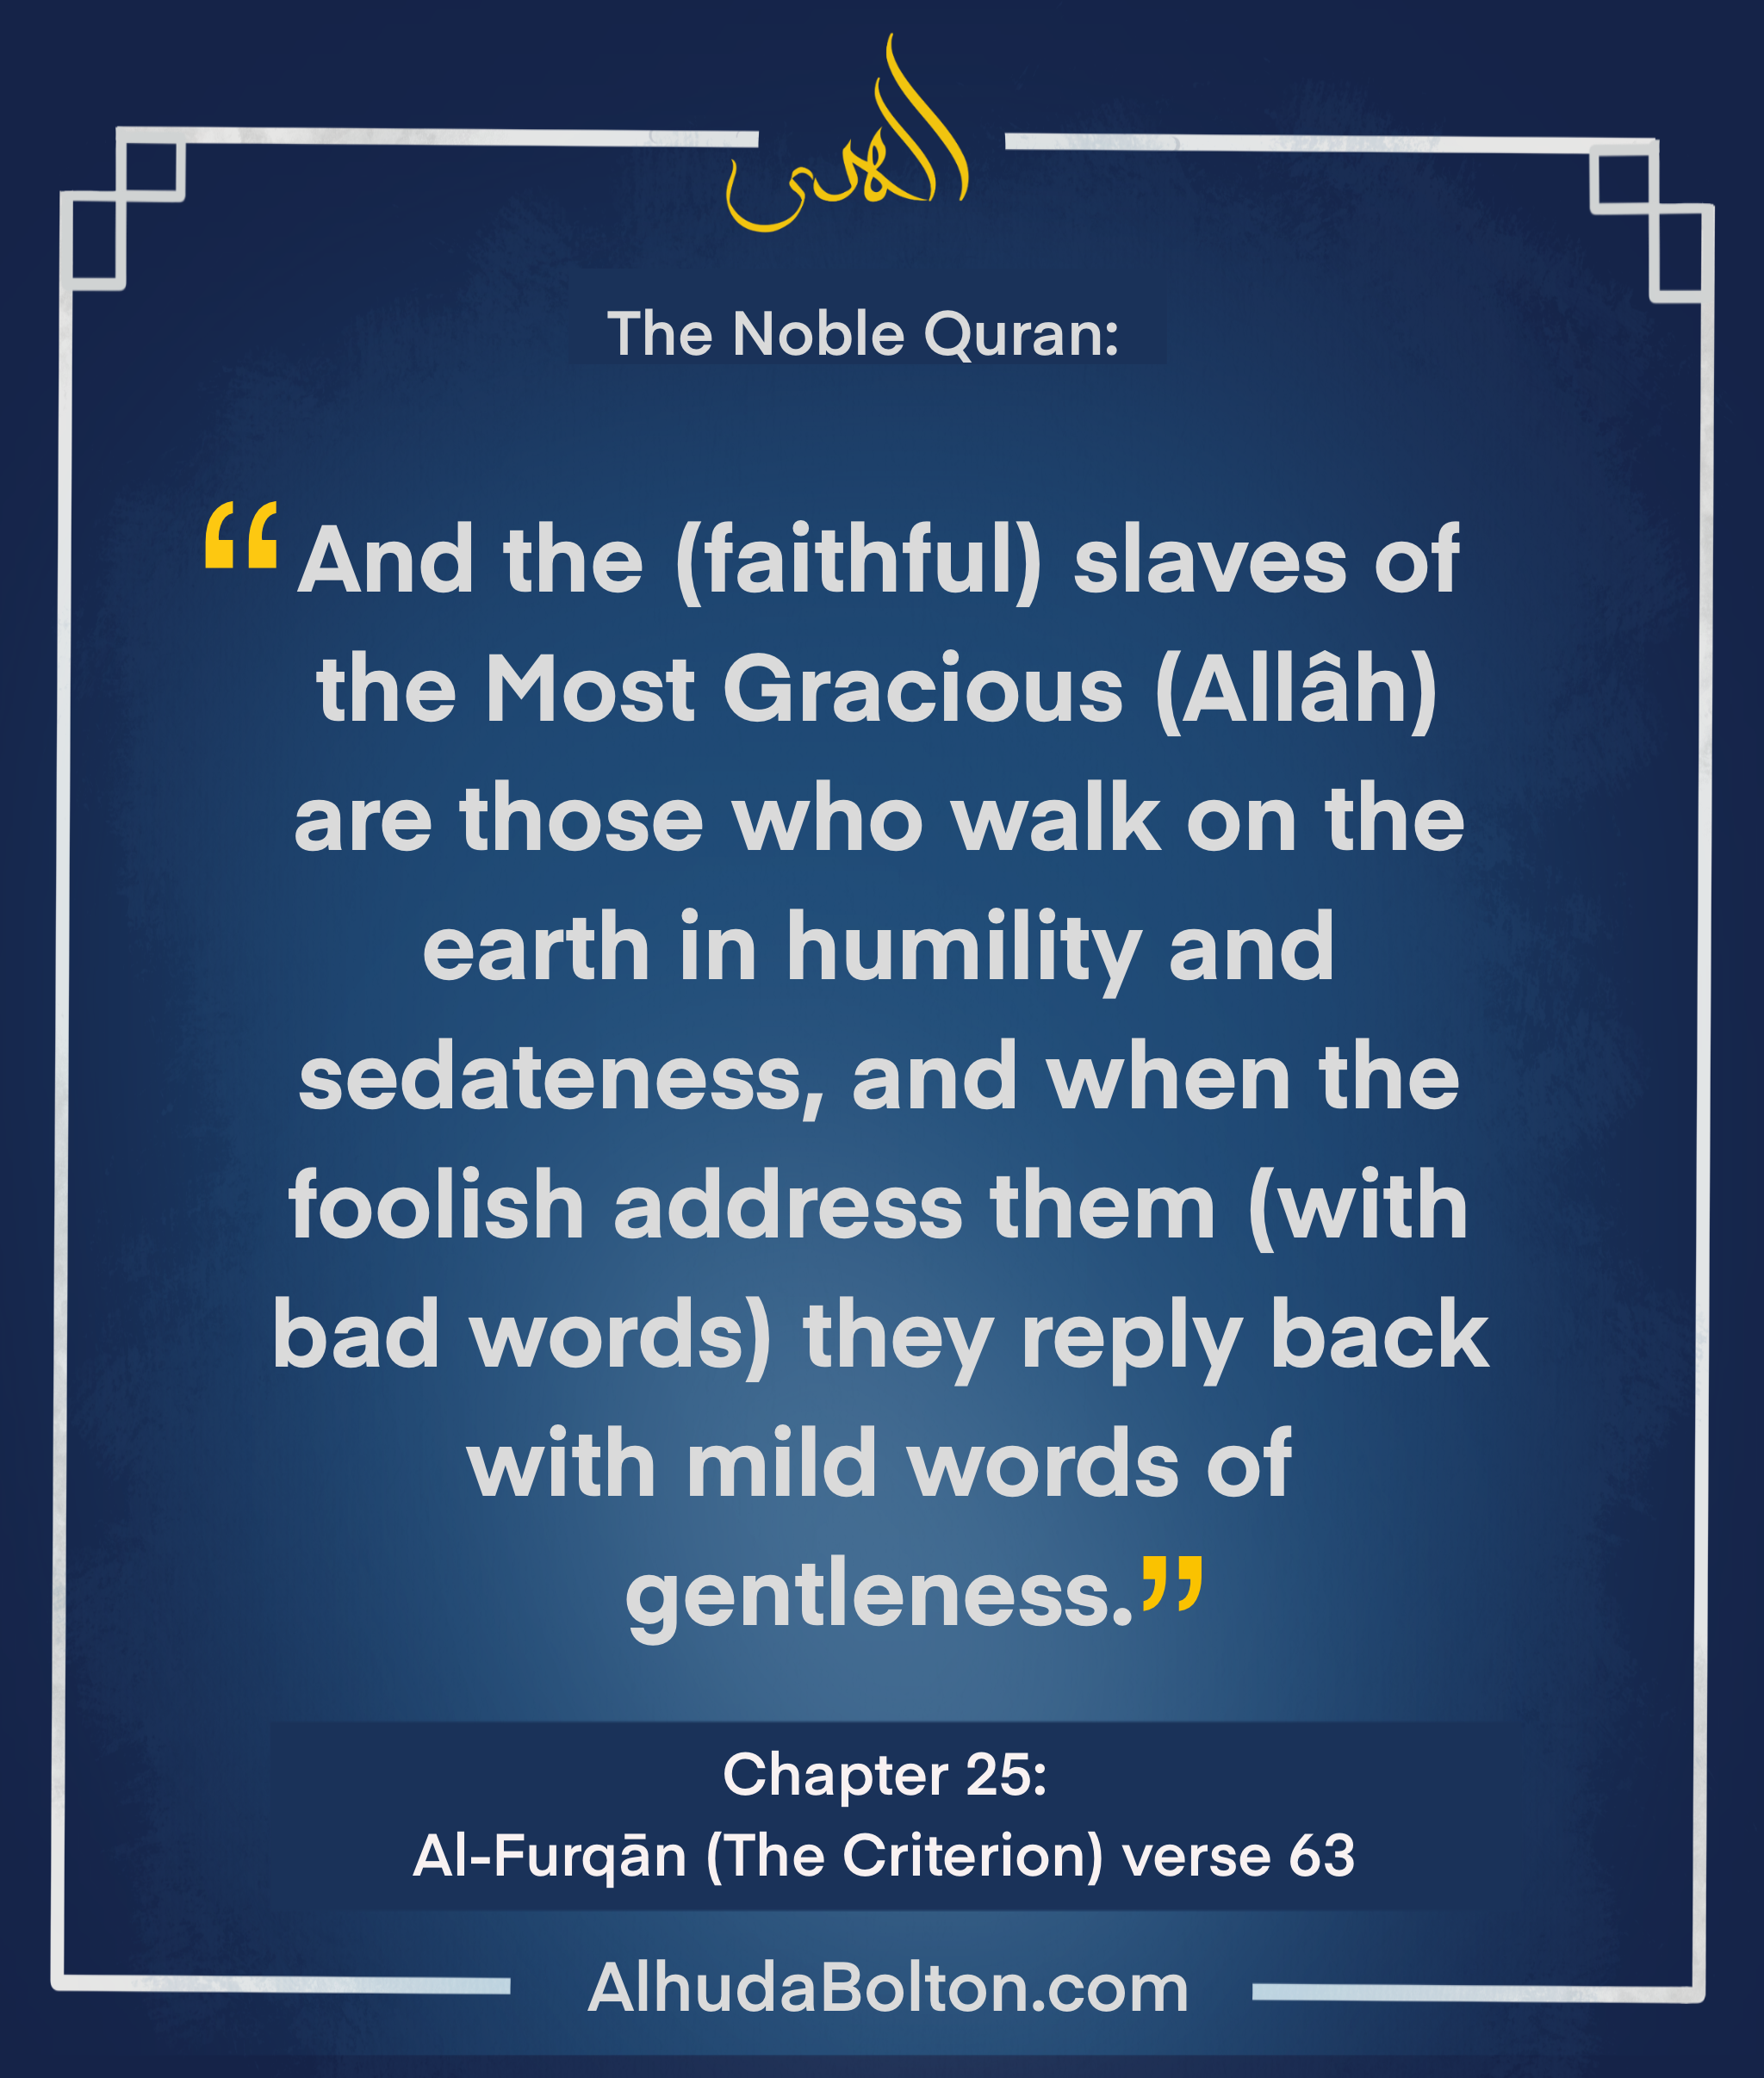 Quran: “and when the foolish address them”